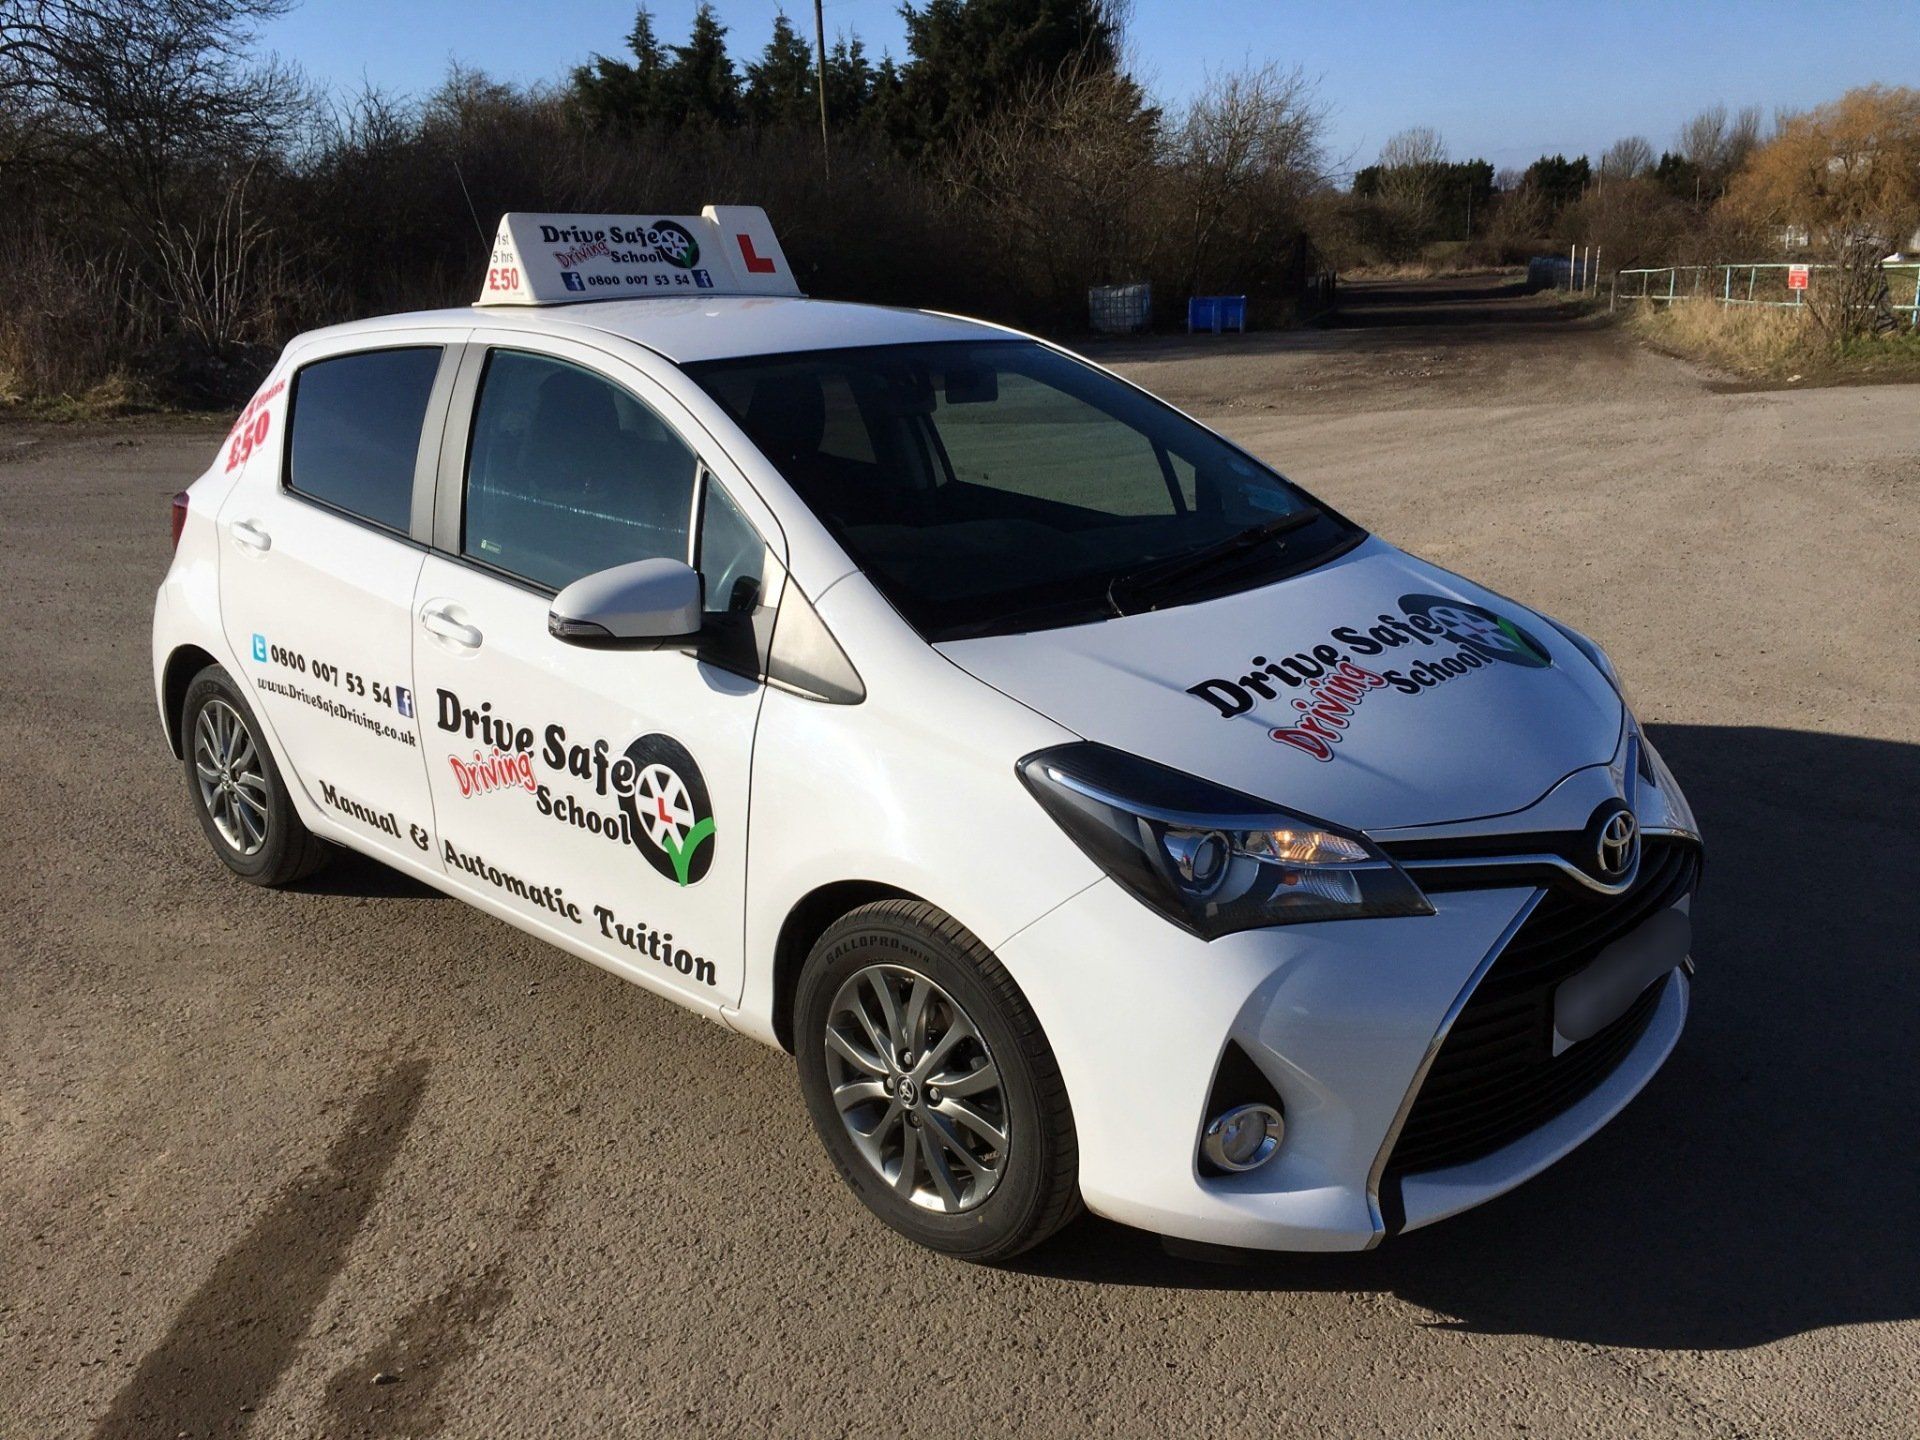 Andy's Yaris for off road under 17 driving lessons